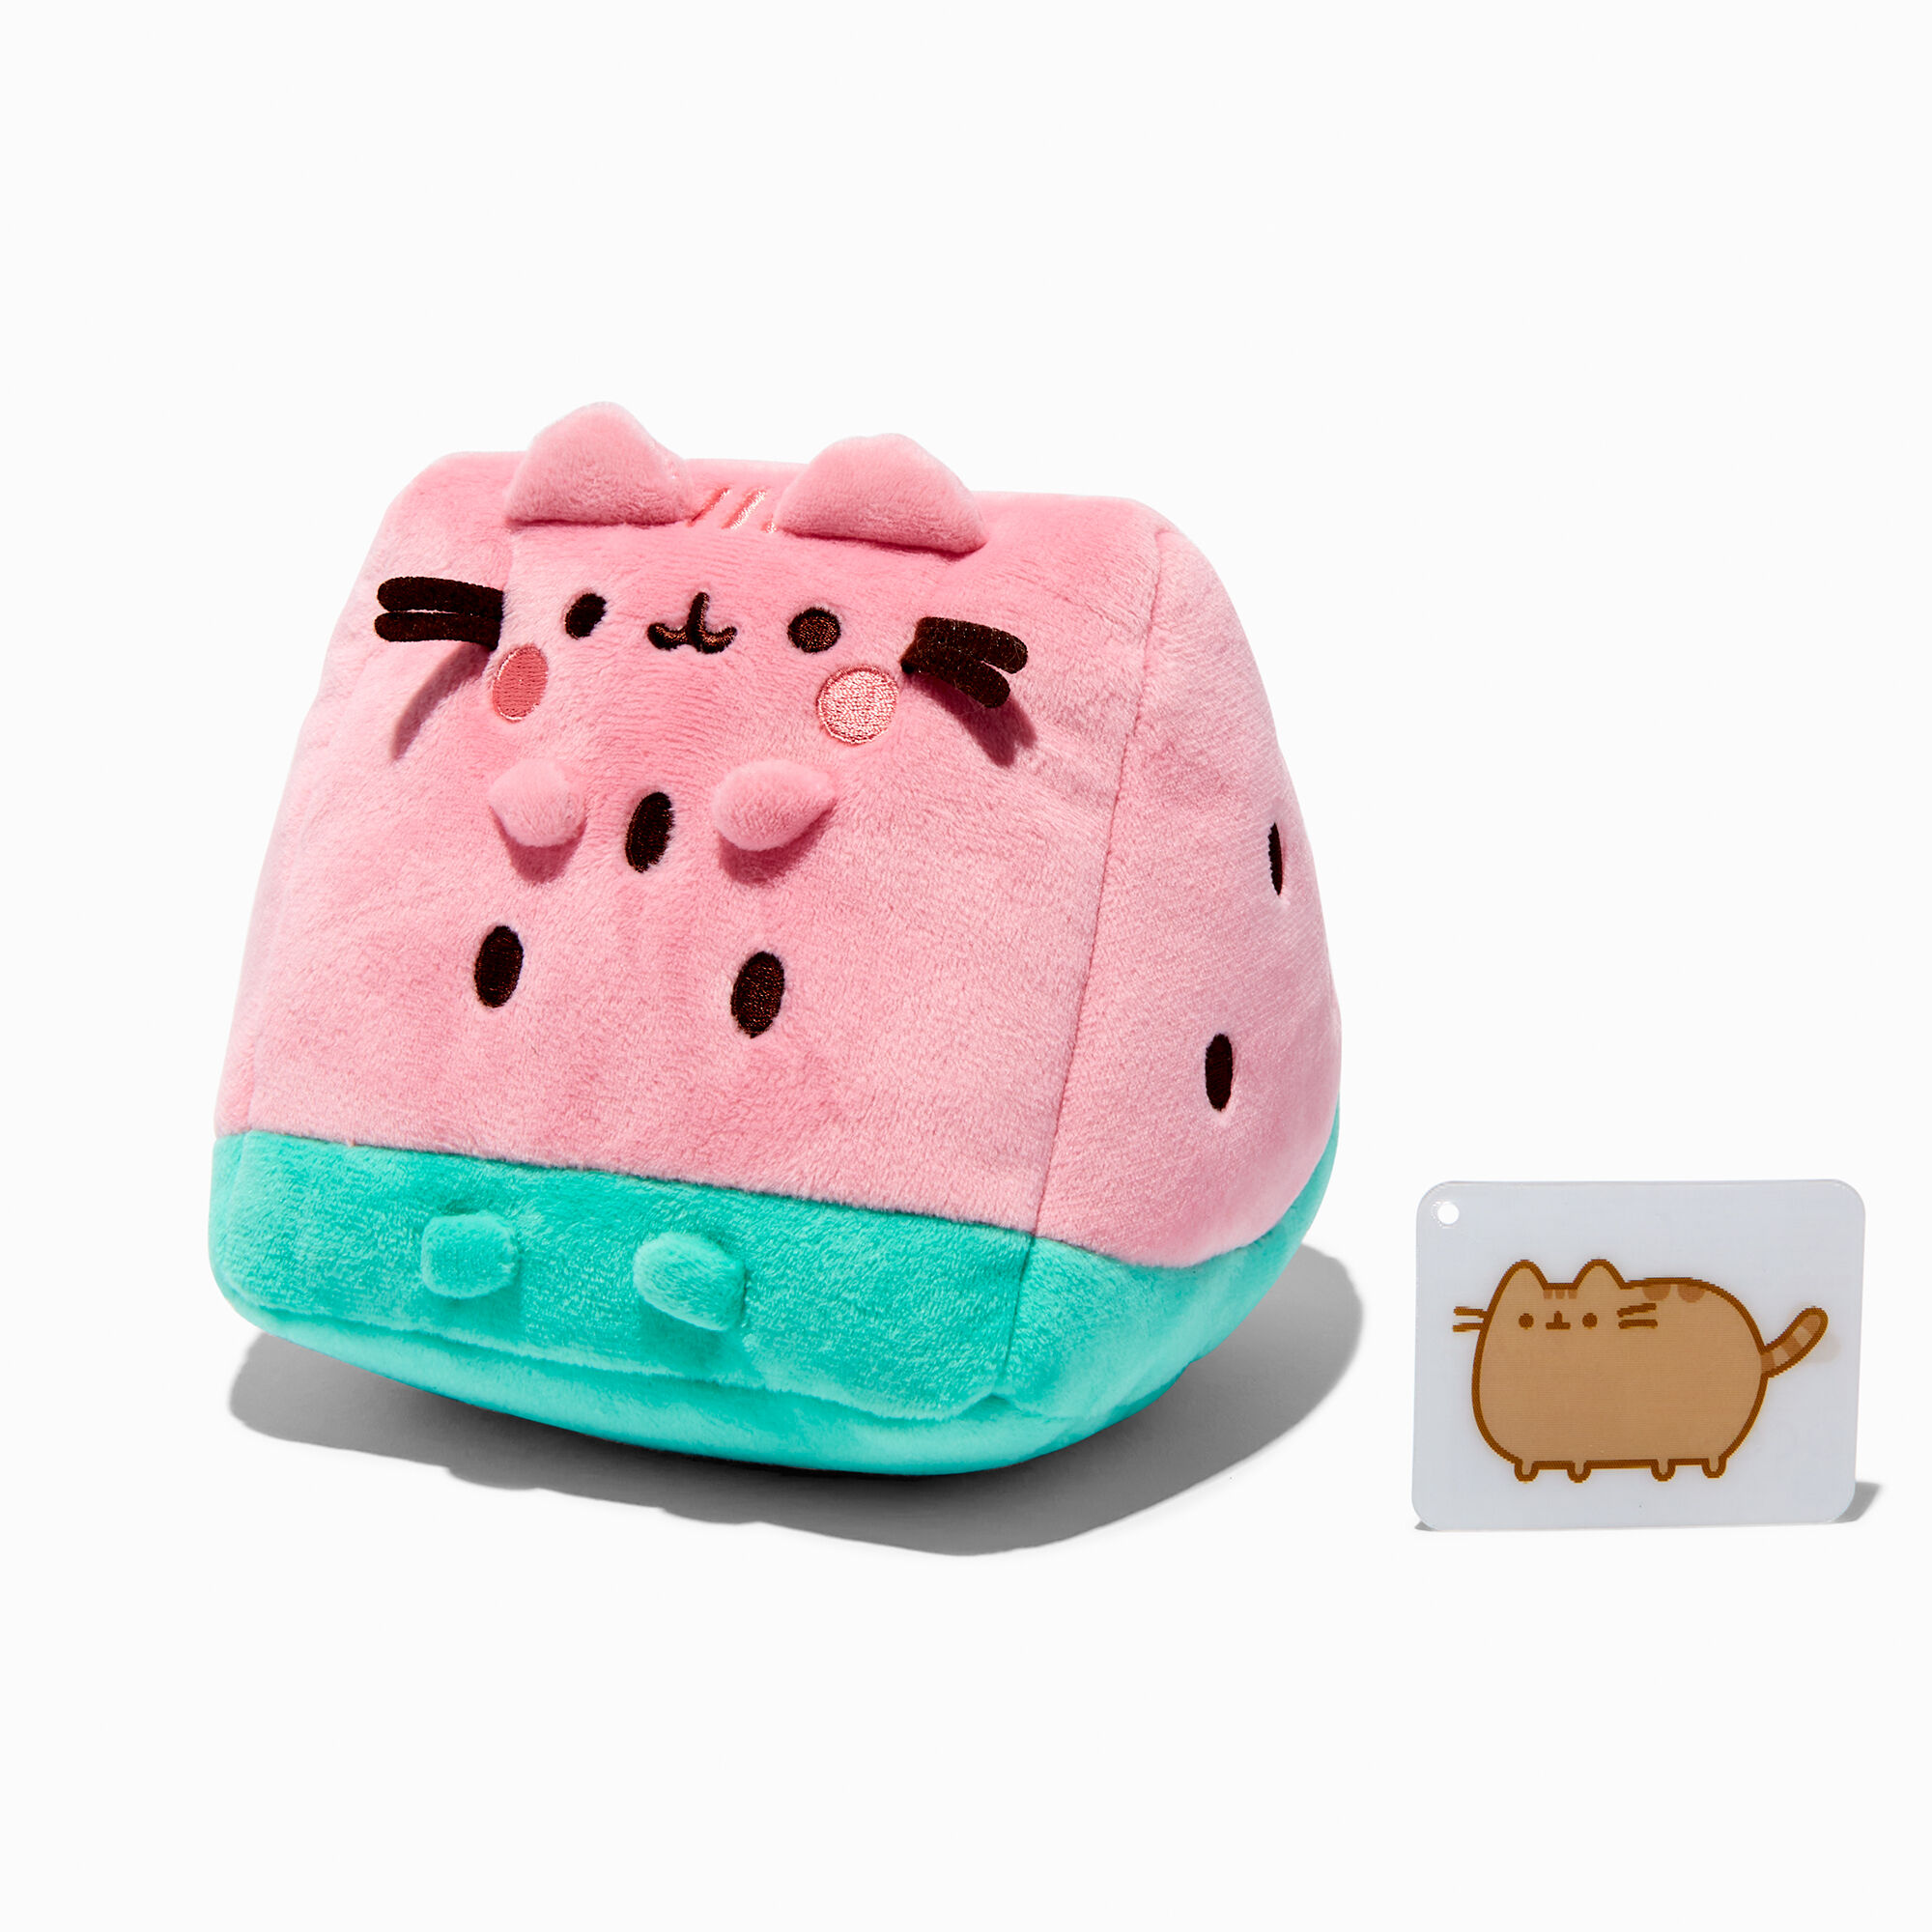 View Claires Pusheen 6 Watermelon Soft Toy information